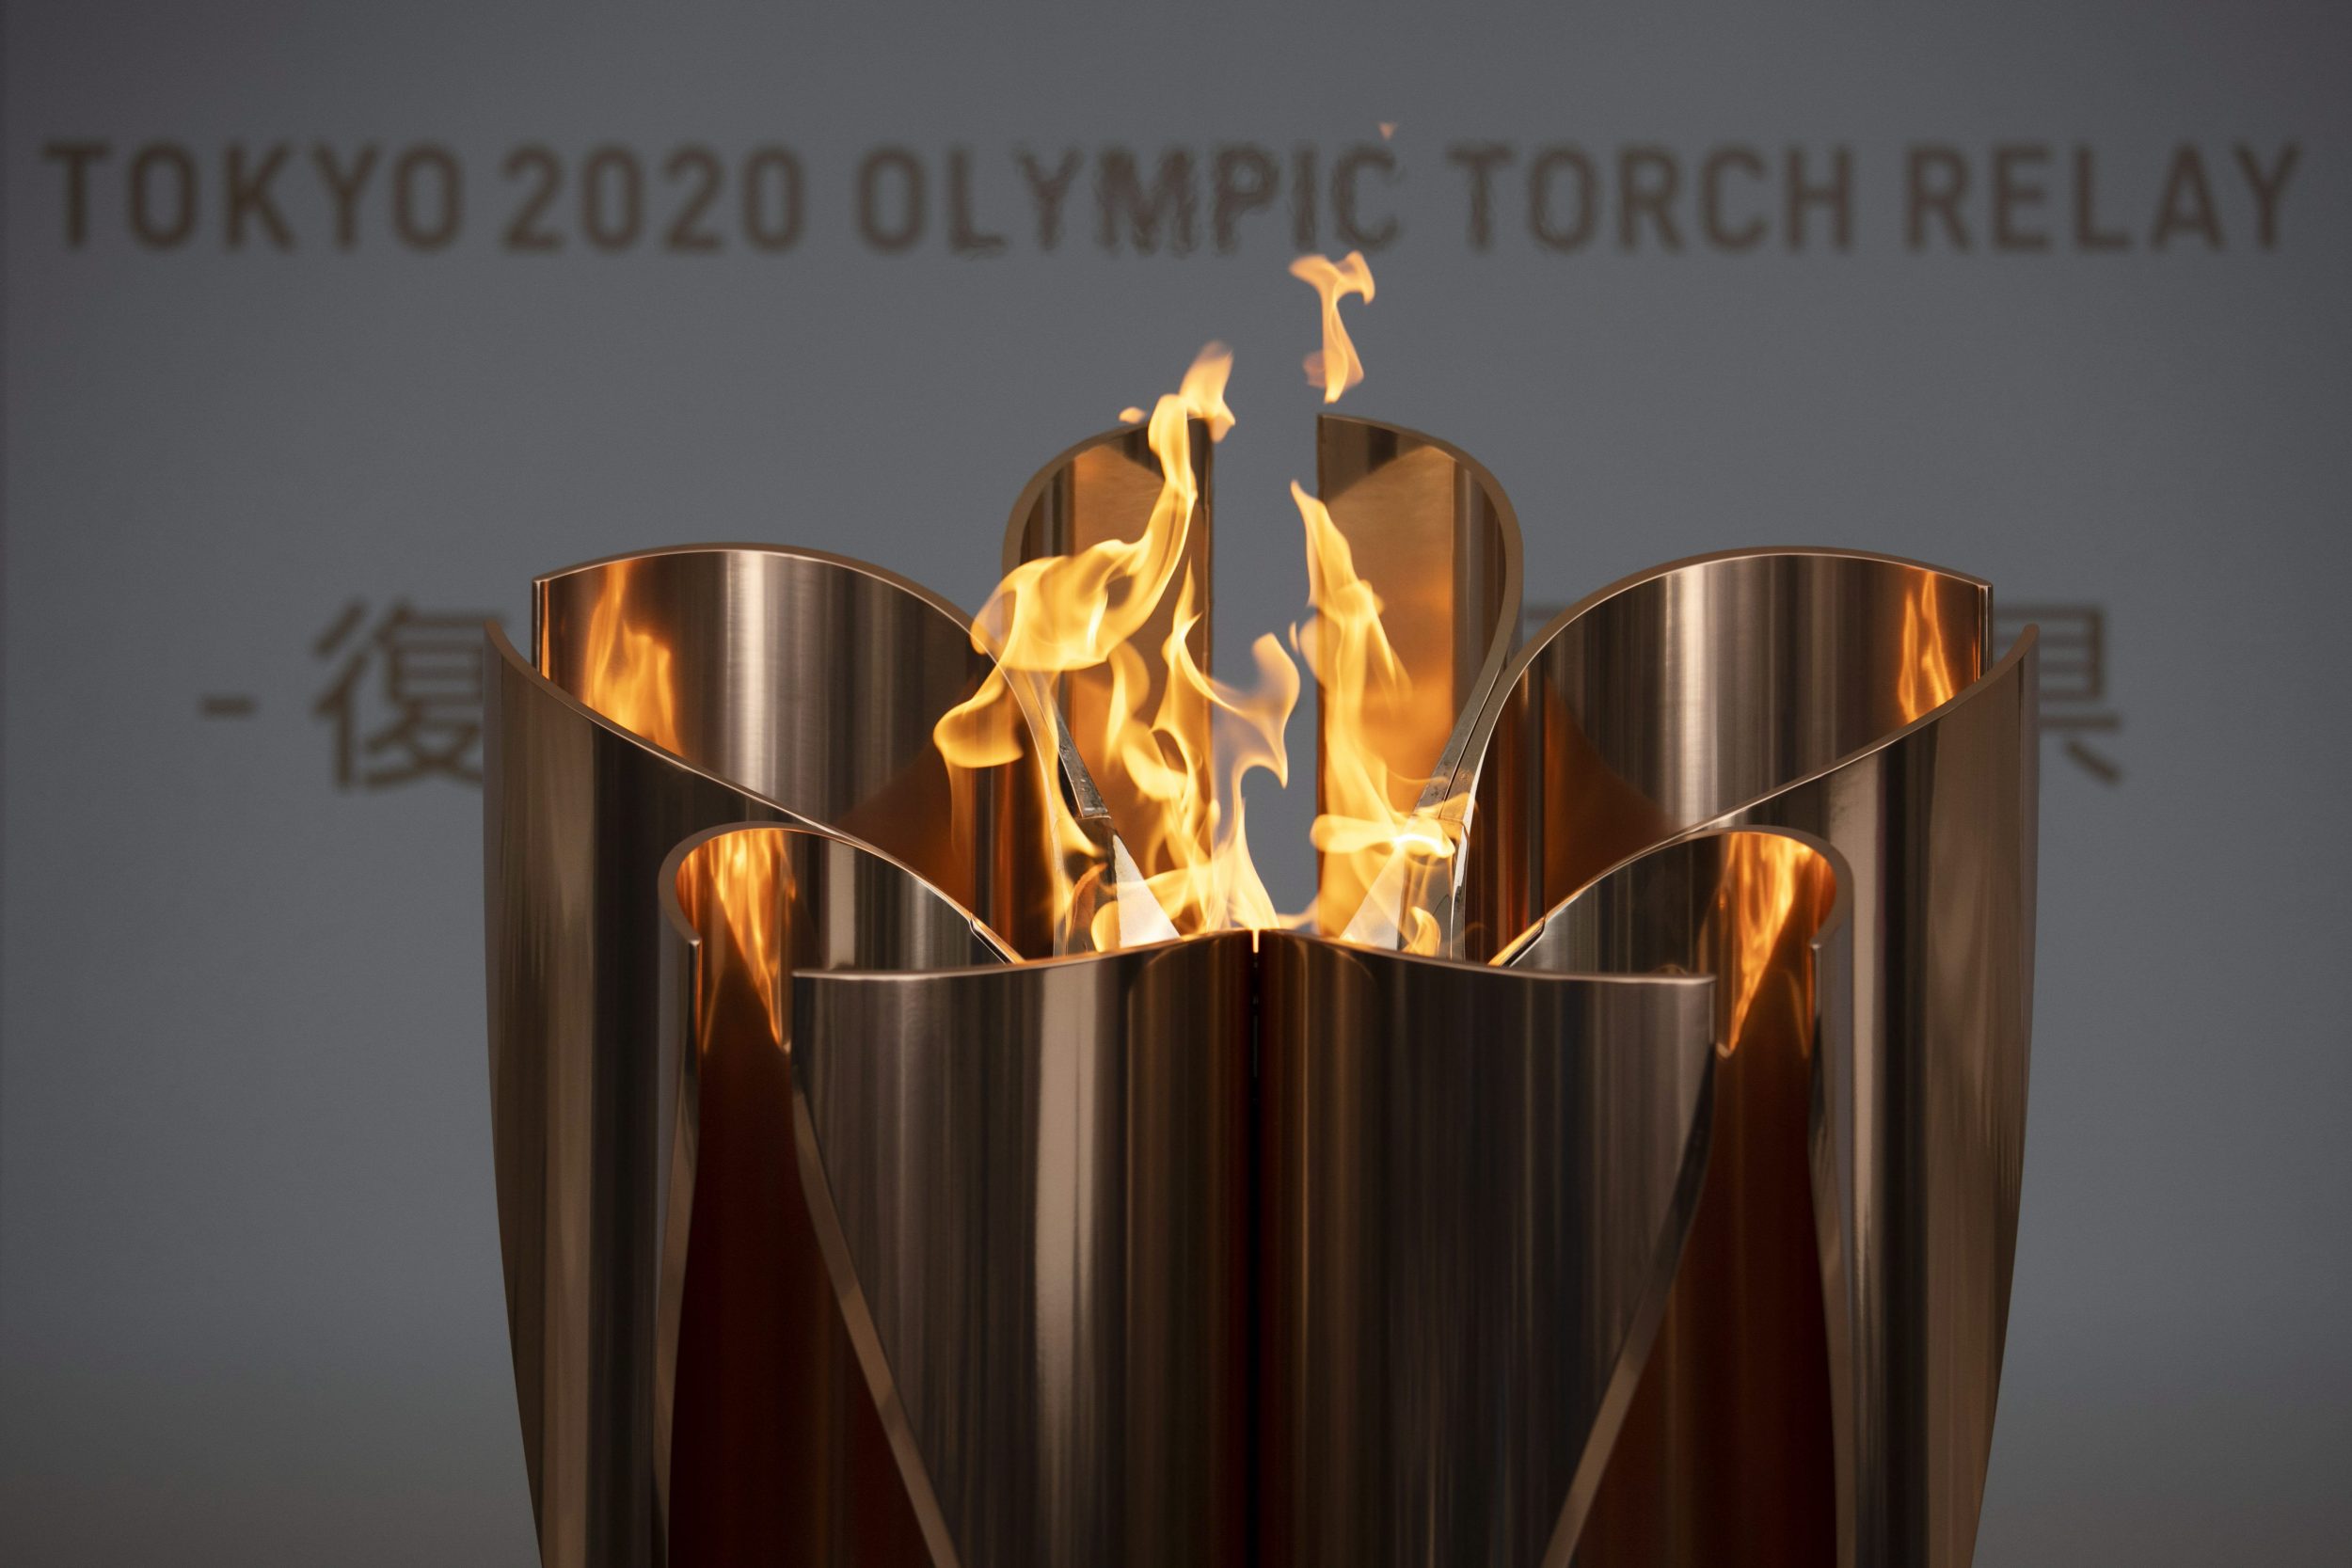 The Tokyo 2020 Olympic flame burns during the postponement of the Games